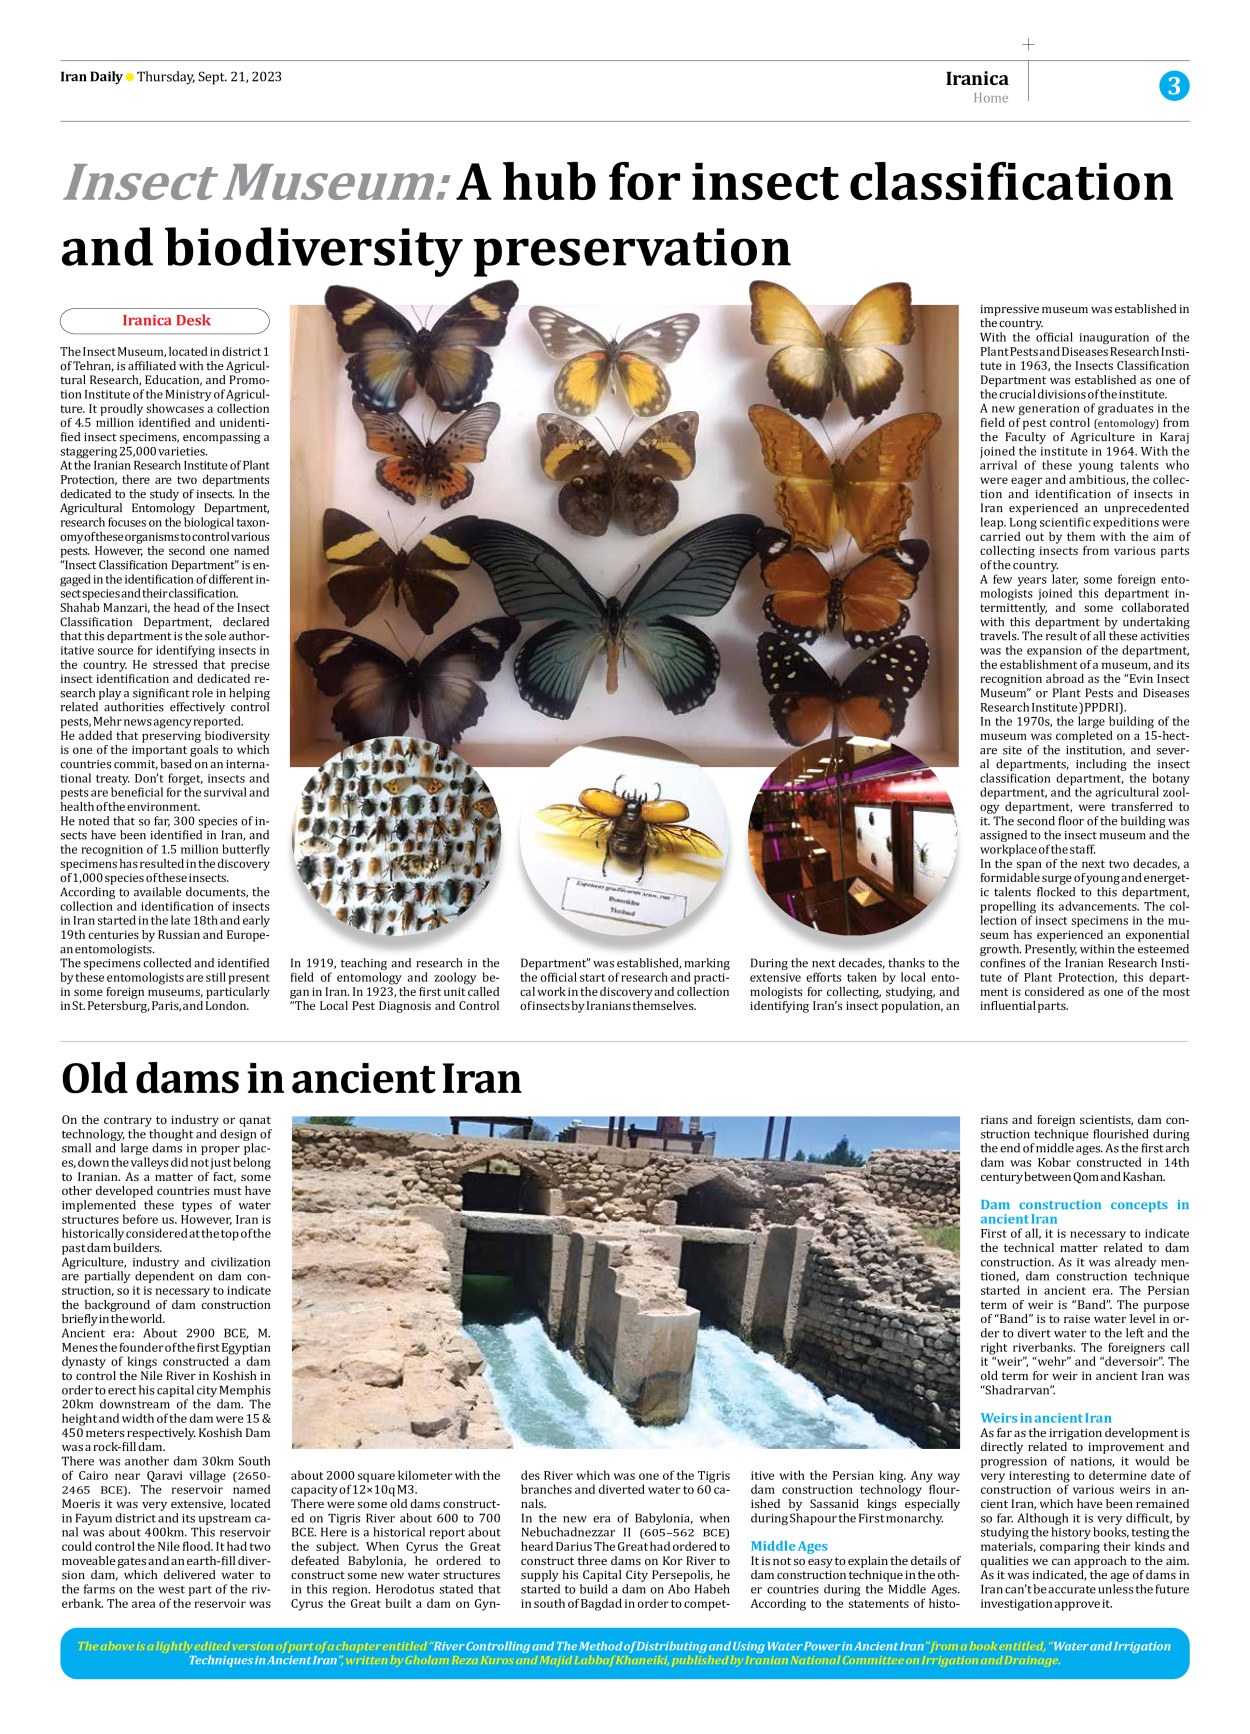 Iran Daily - Number Seven Thousand Three Hundred and Ninety One - 21 September 2023 - Page 3